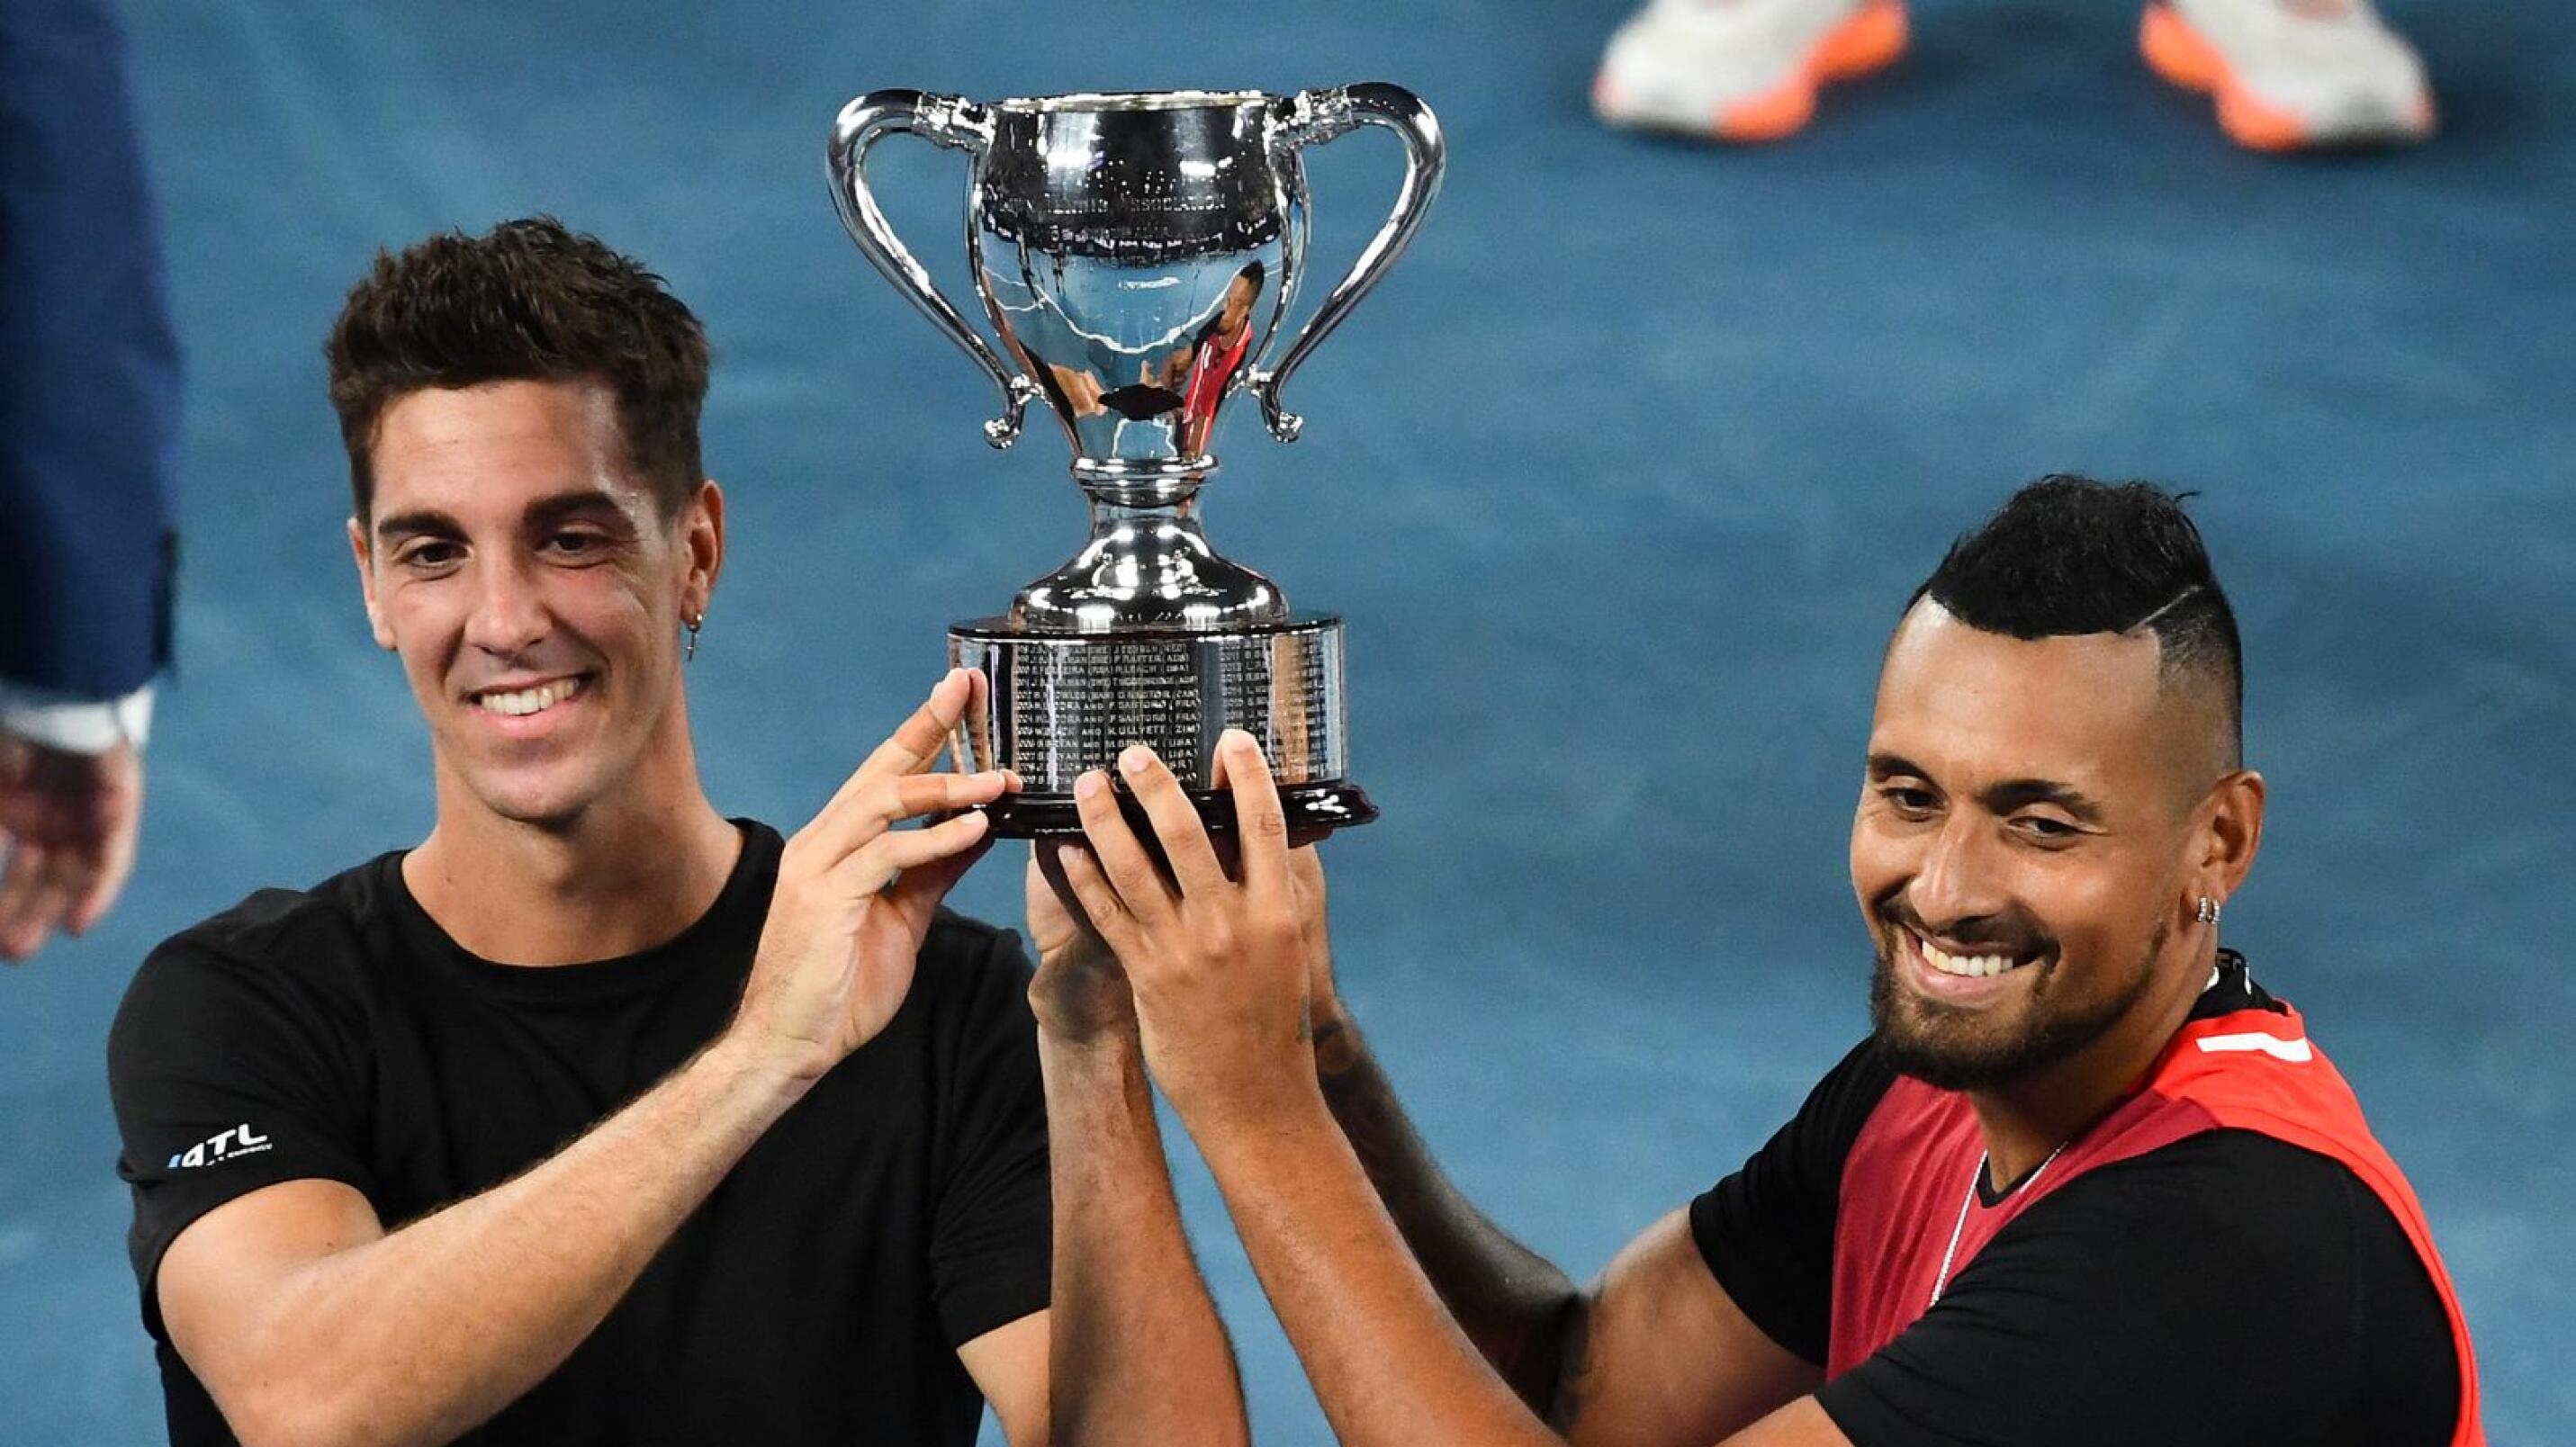 Australia's Thanasi Kokkinakis Nick Kyrgios pose with the trophy after winning against compatriots Matthew Ebden and Max Purcell during their men's doubles final match on day thirteen of the Australian Open tennis tournament in Melbourne on Saturday